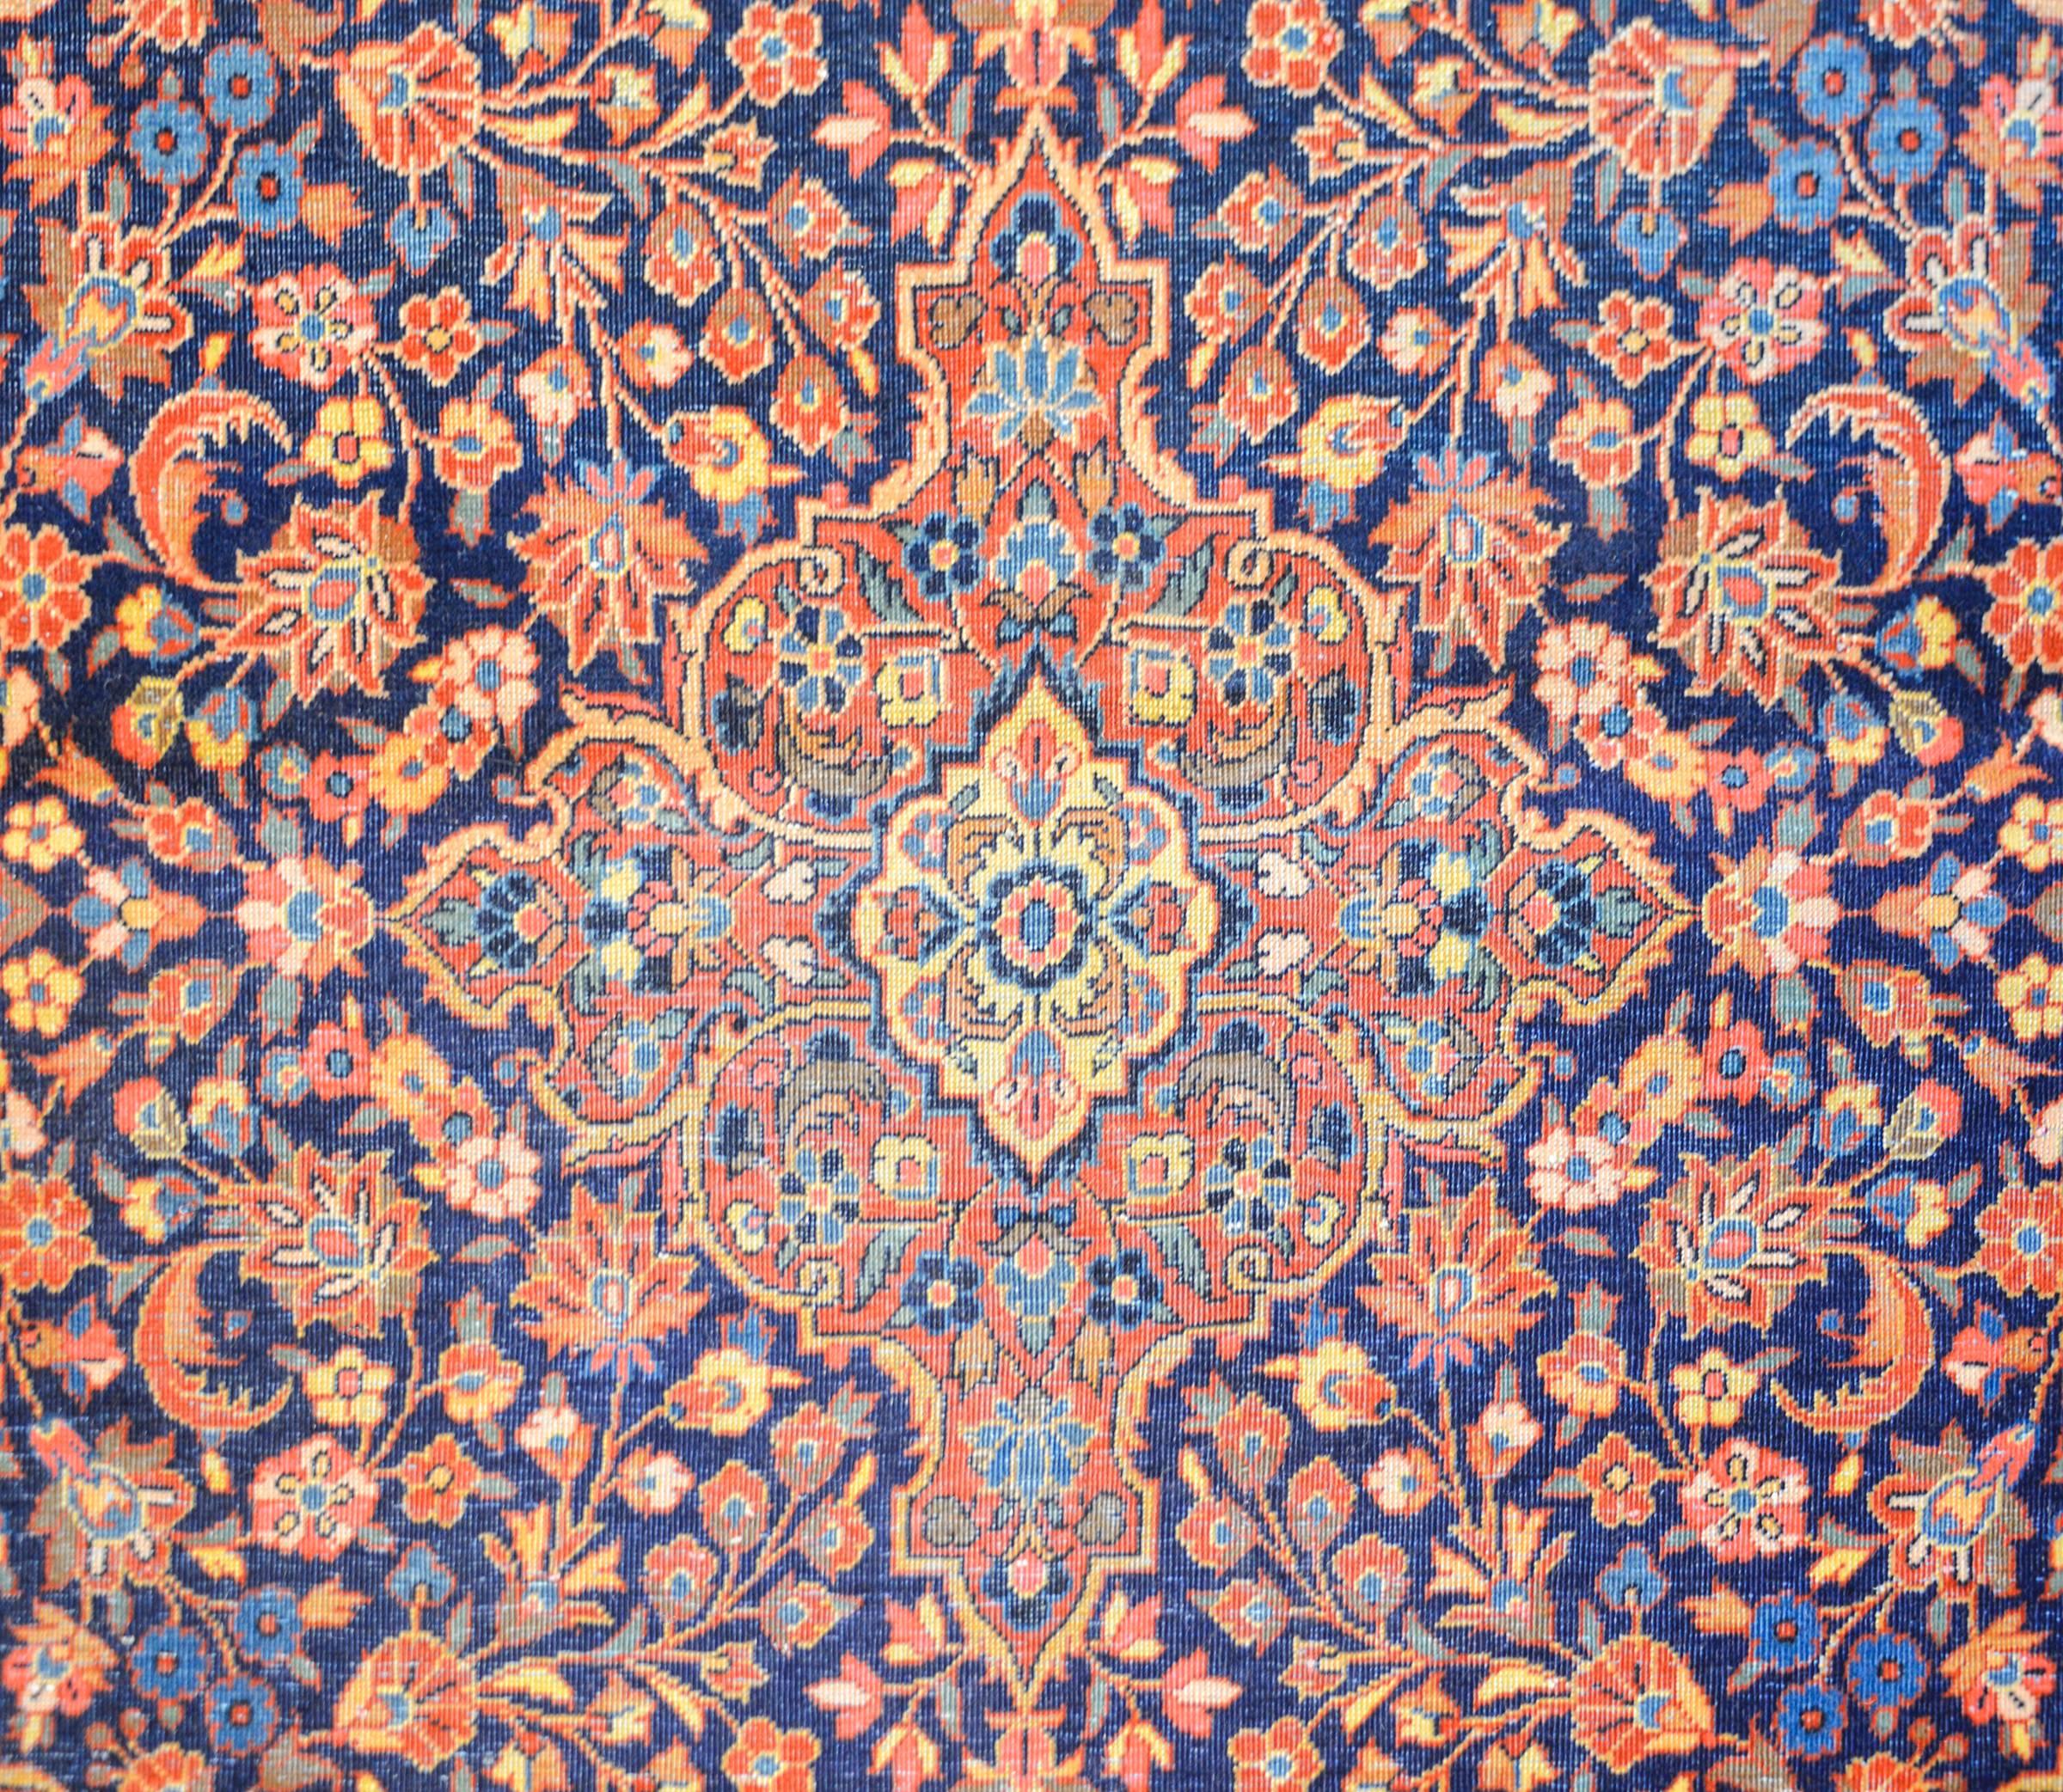 An unbelievable early 20th century Persian Kashan rug with an intense and densely woven all-over large and small-scale floral and vine patterns rendered in crimson, indigo and natural wool colors, all on a dark indigo background. The border is